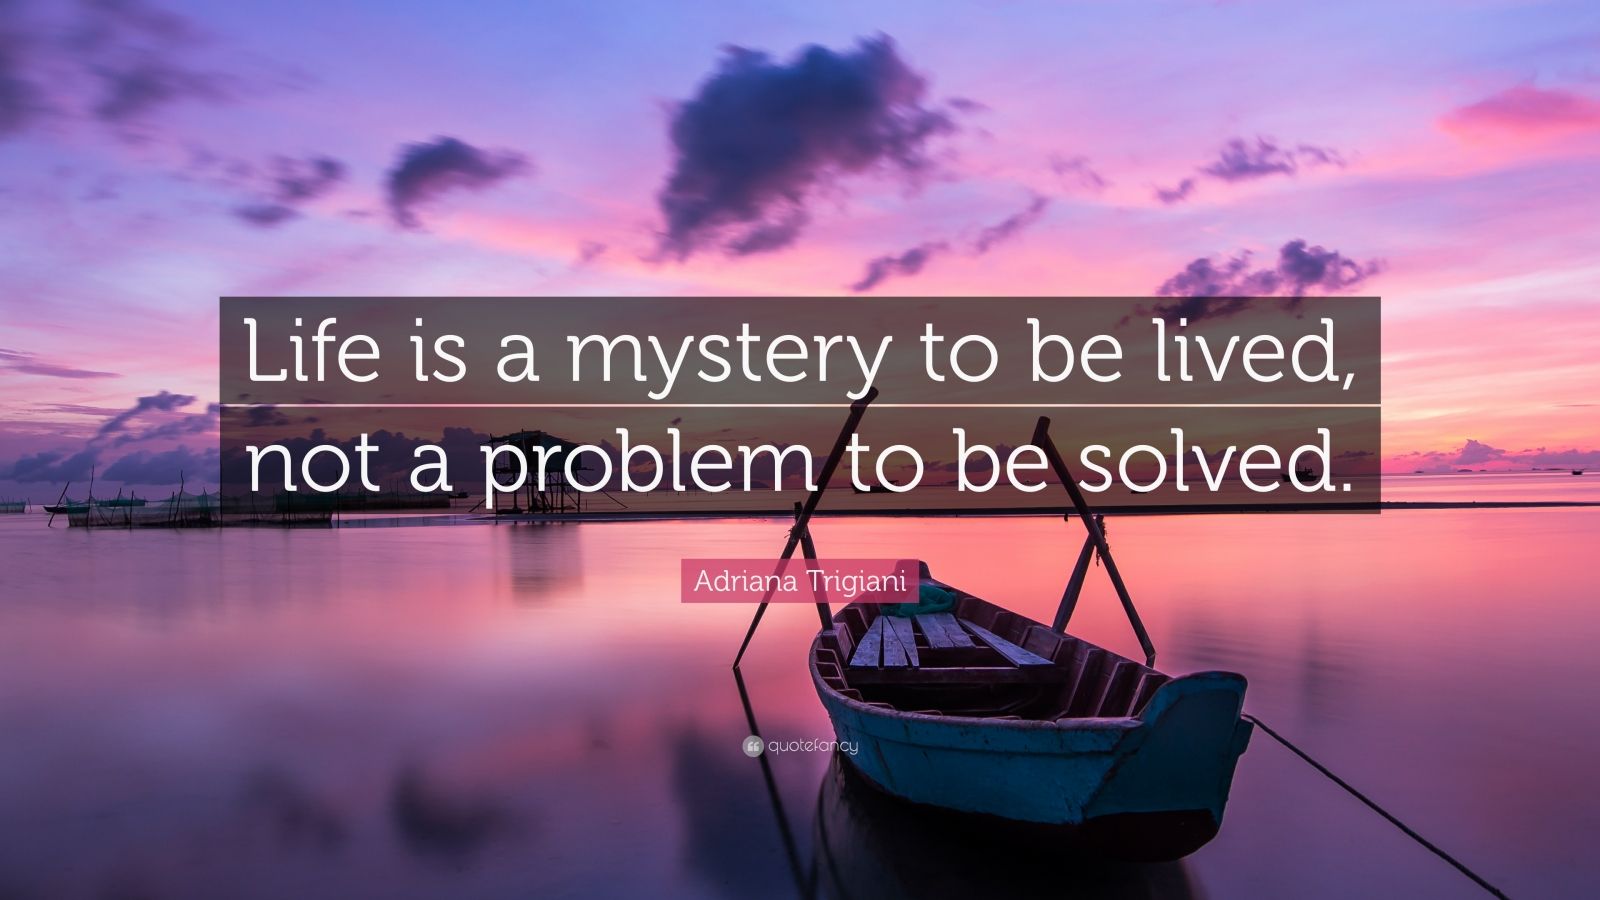 who said the mystery of life is not a problem to be solved